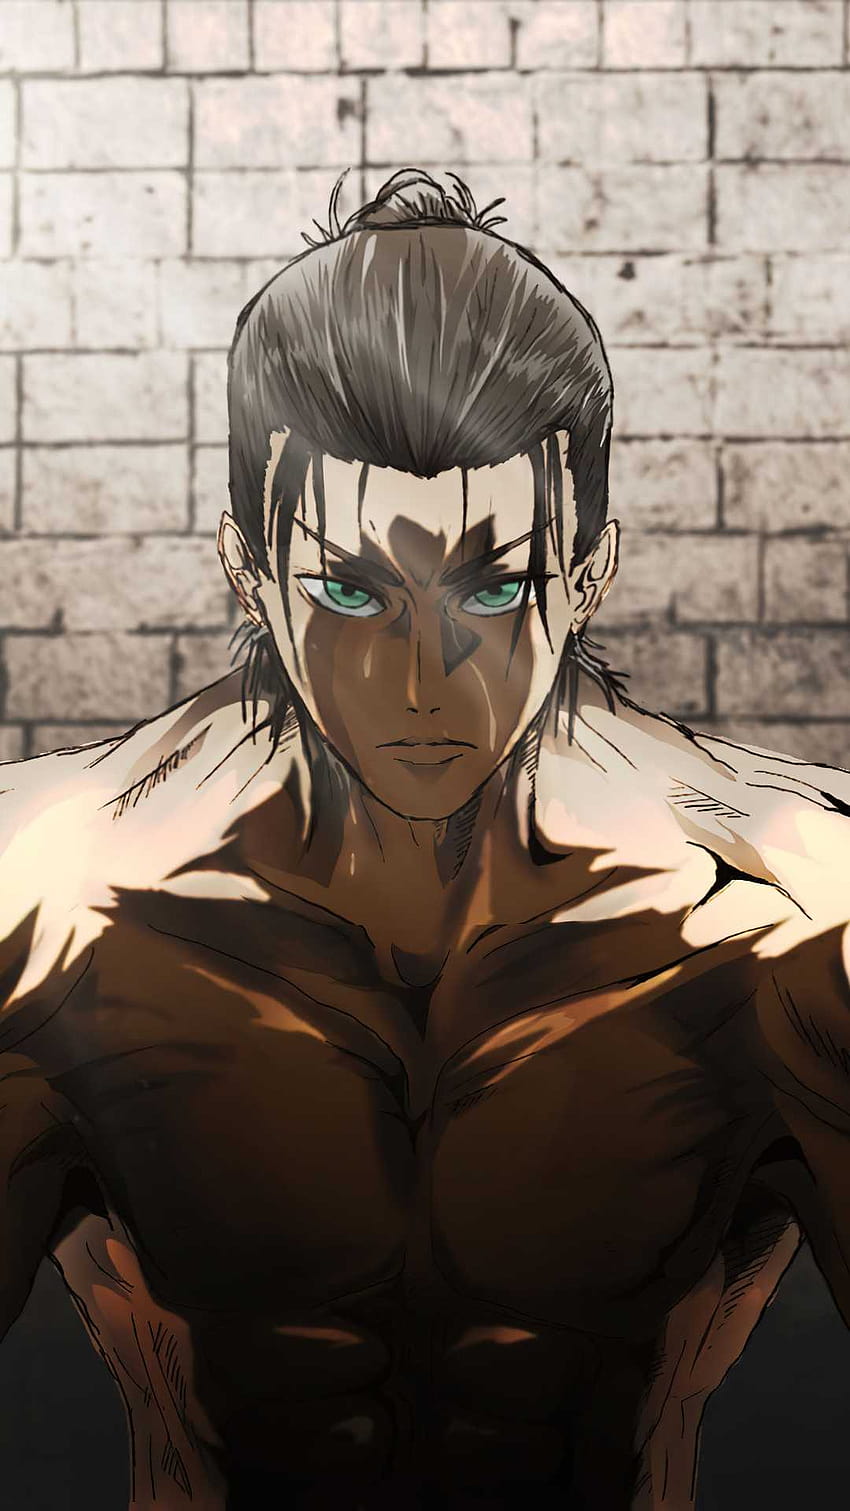 Eren Jaeger posted by John Anderson, eren yeager iphone HD phone wallpaper